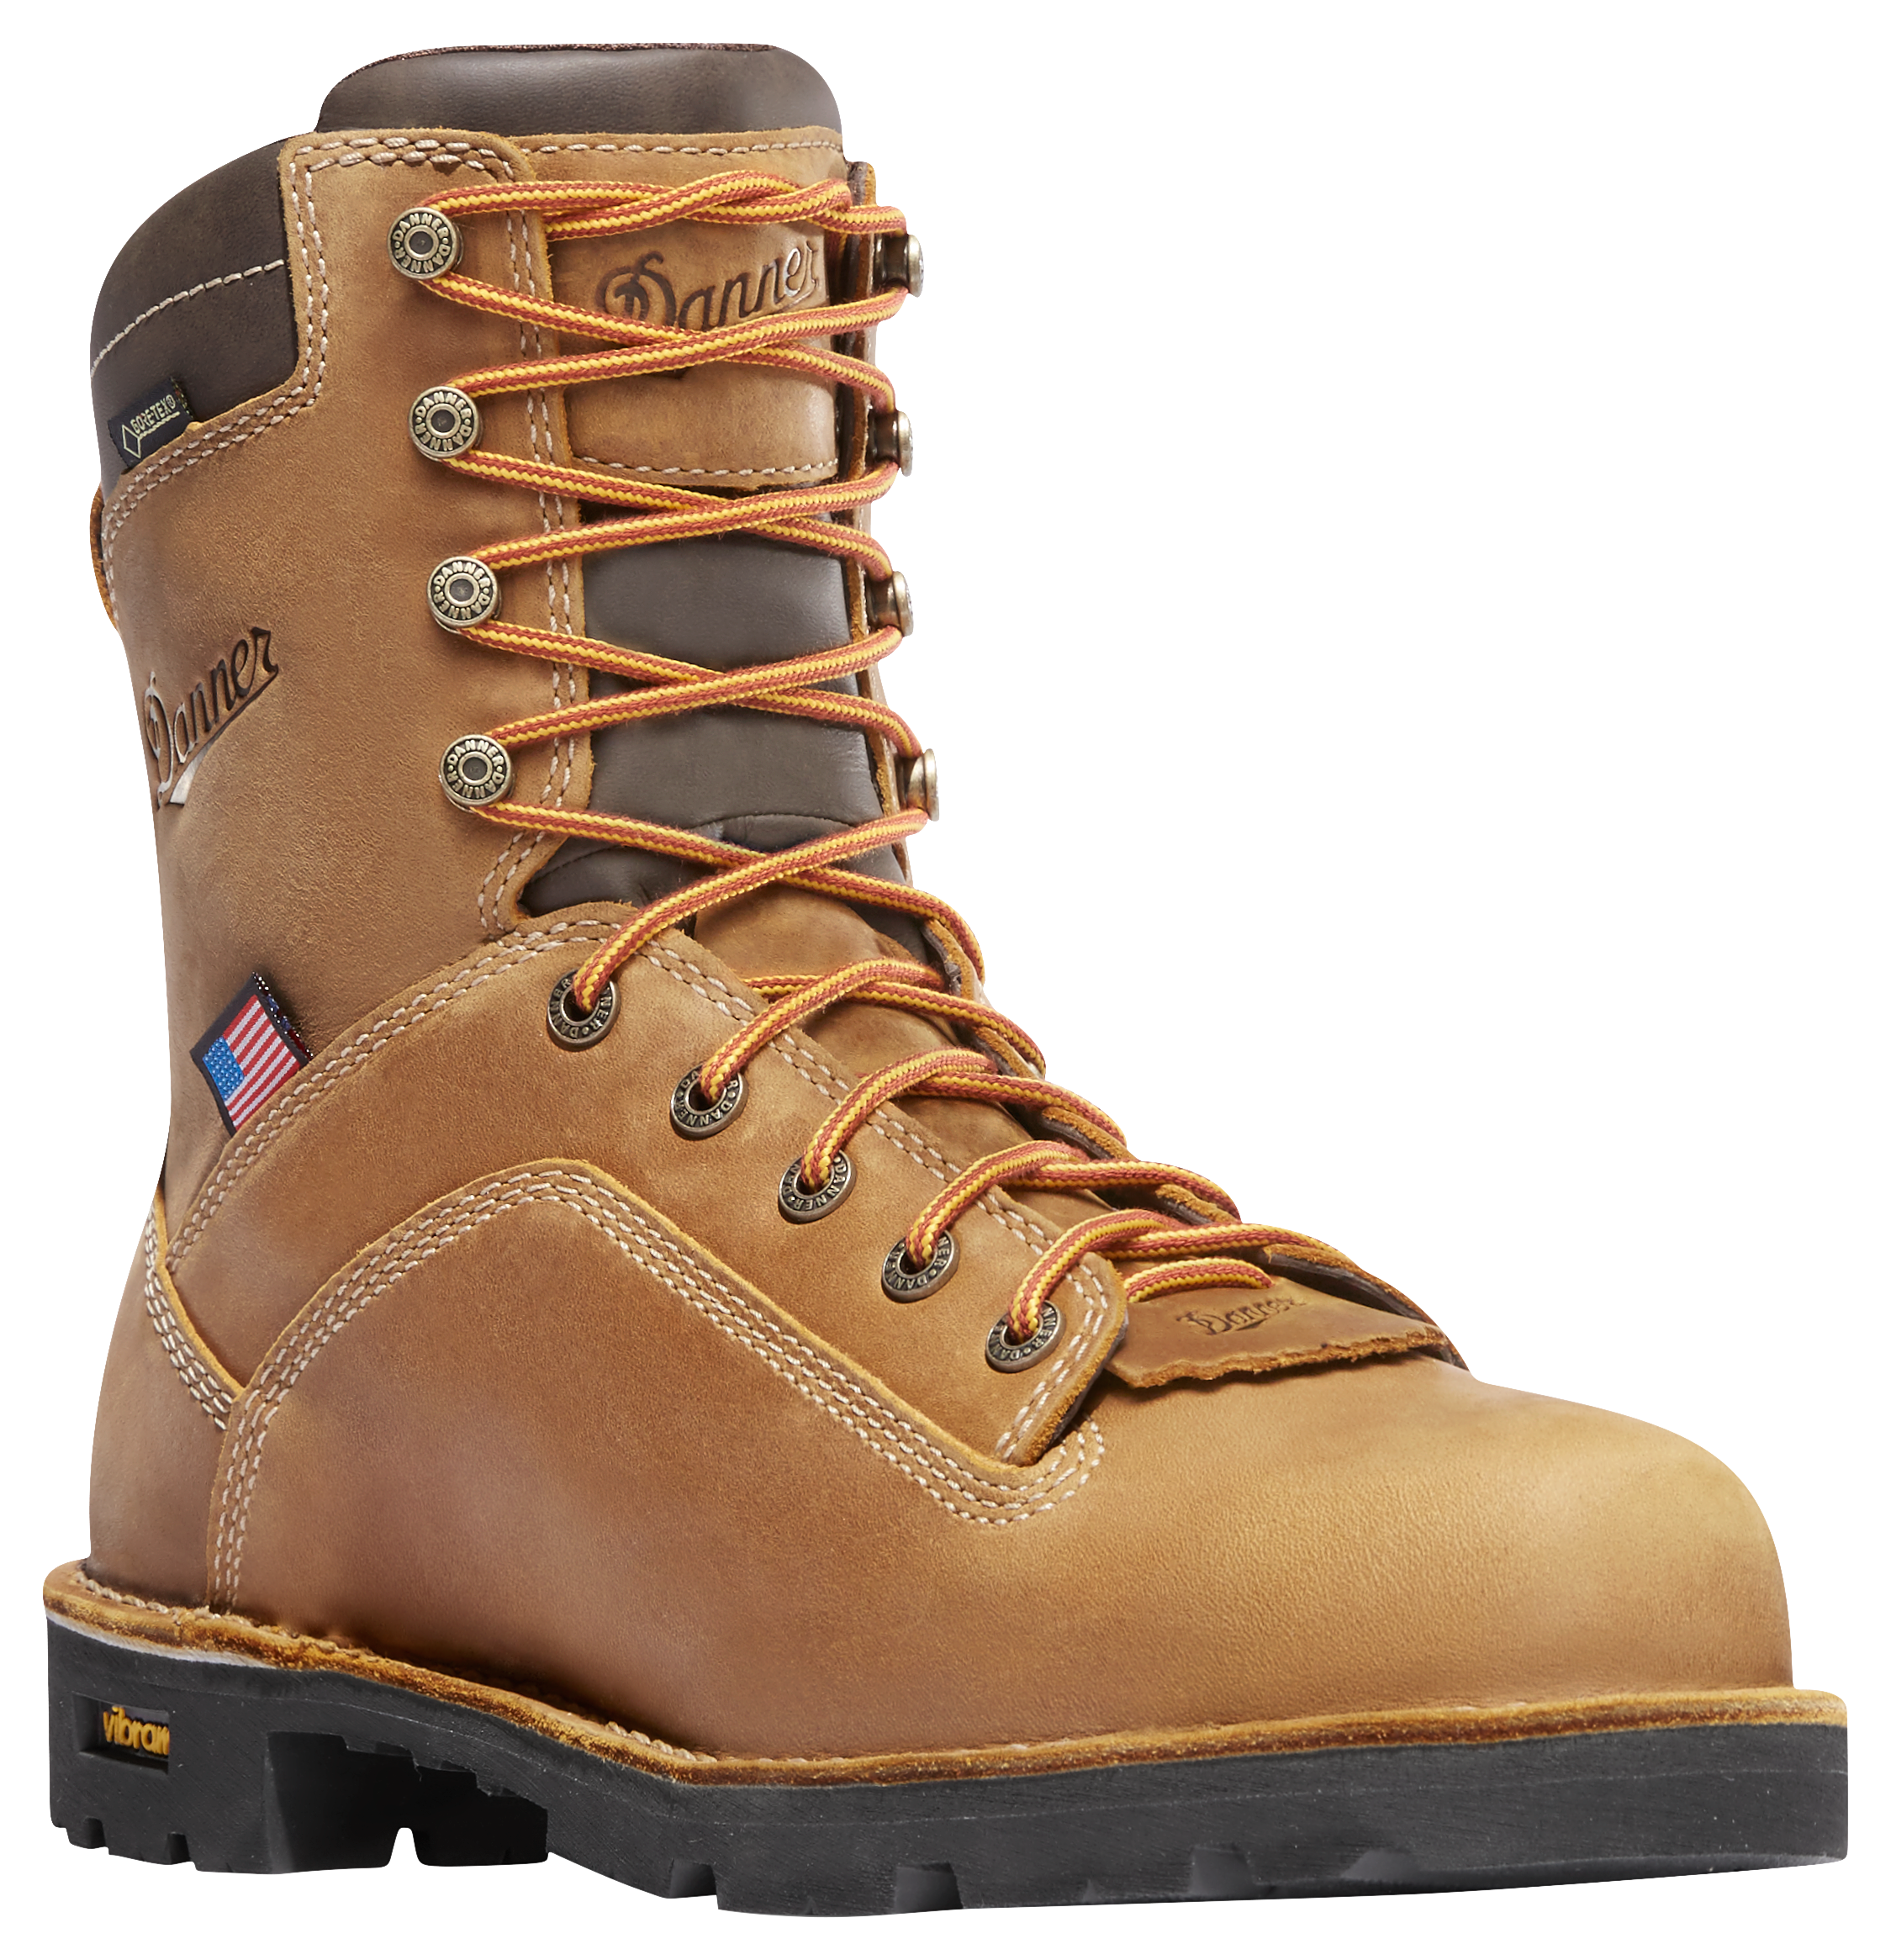 Danner Quarry USA GORE-TEX Insulated Work Boots for Men - Distress Brown - 12W